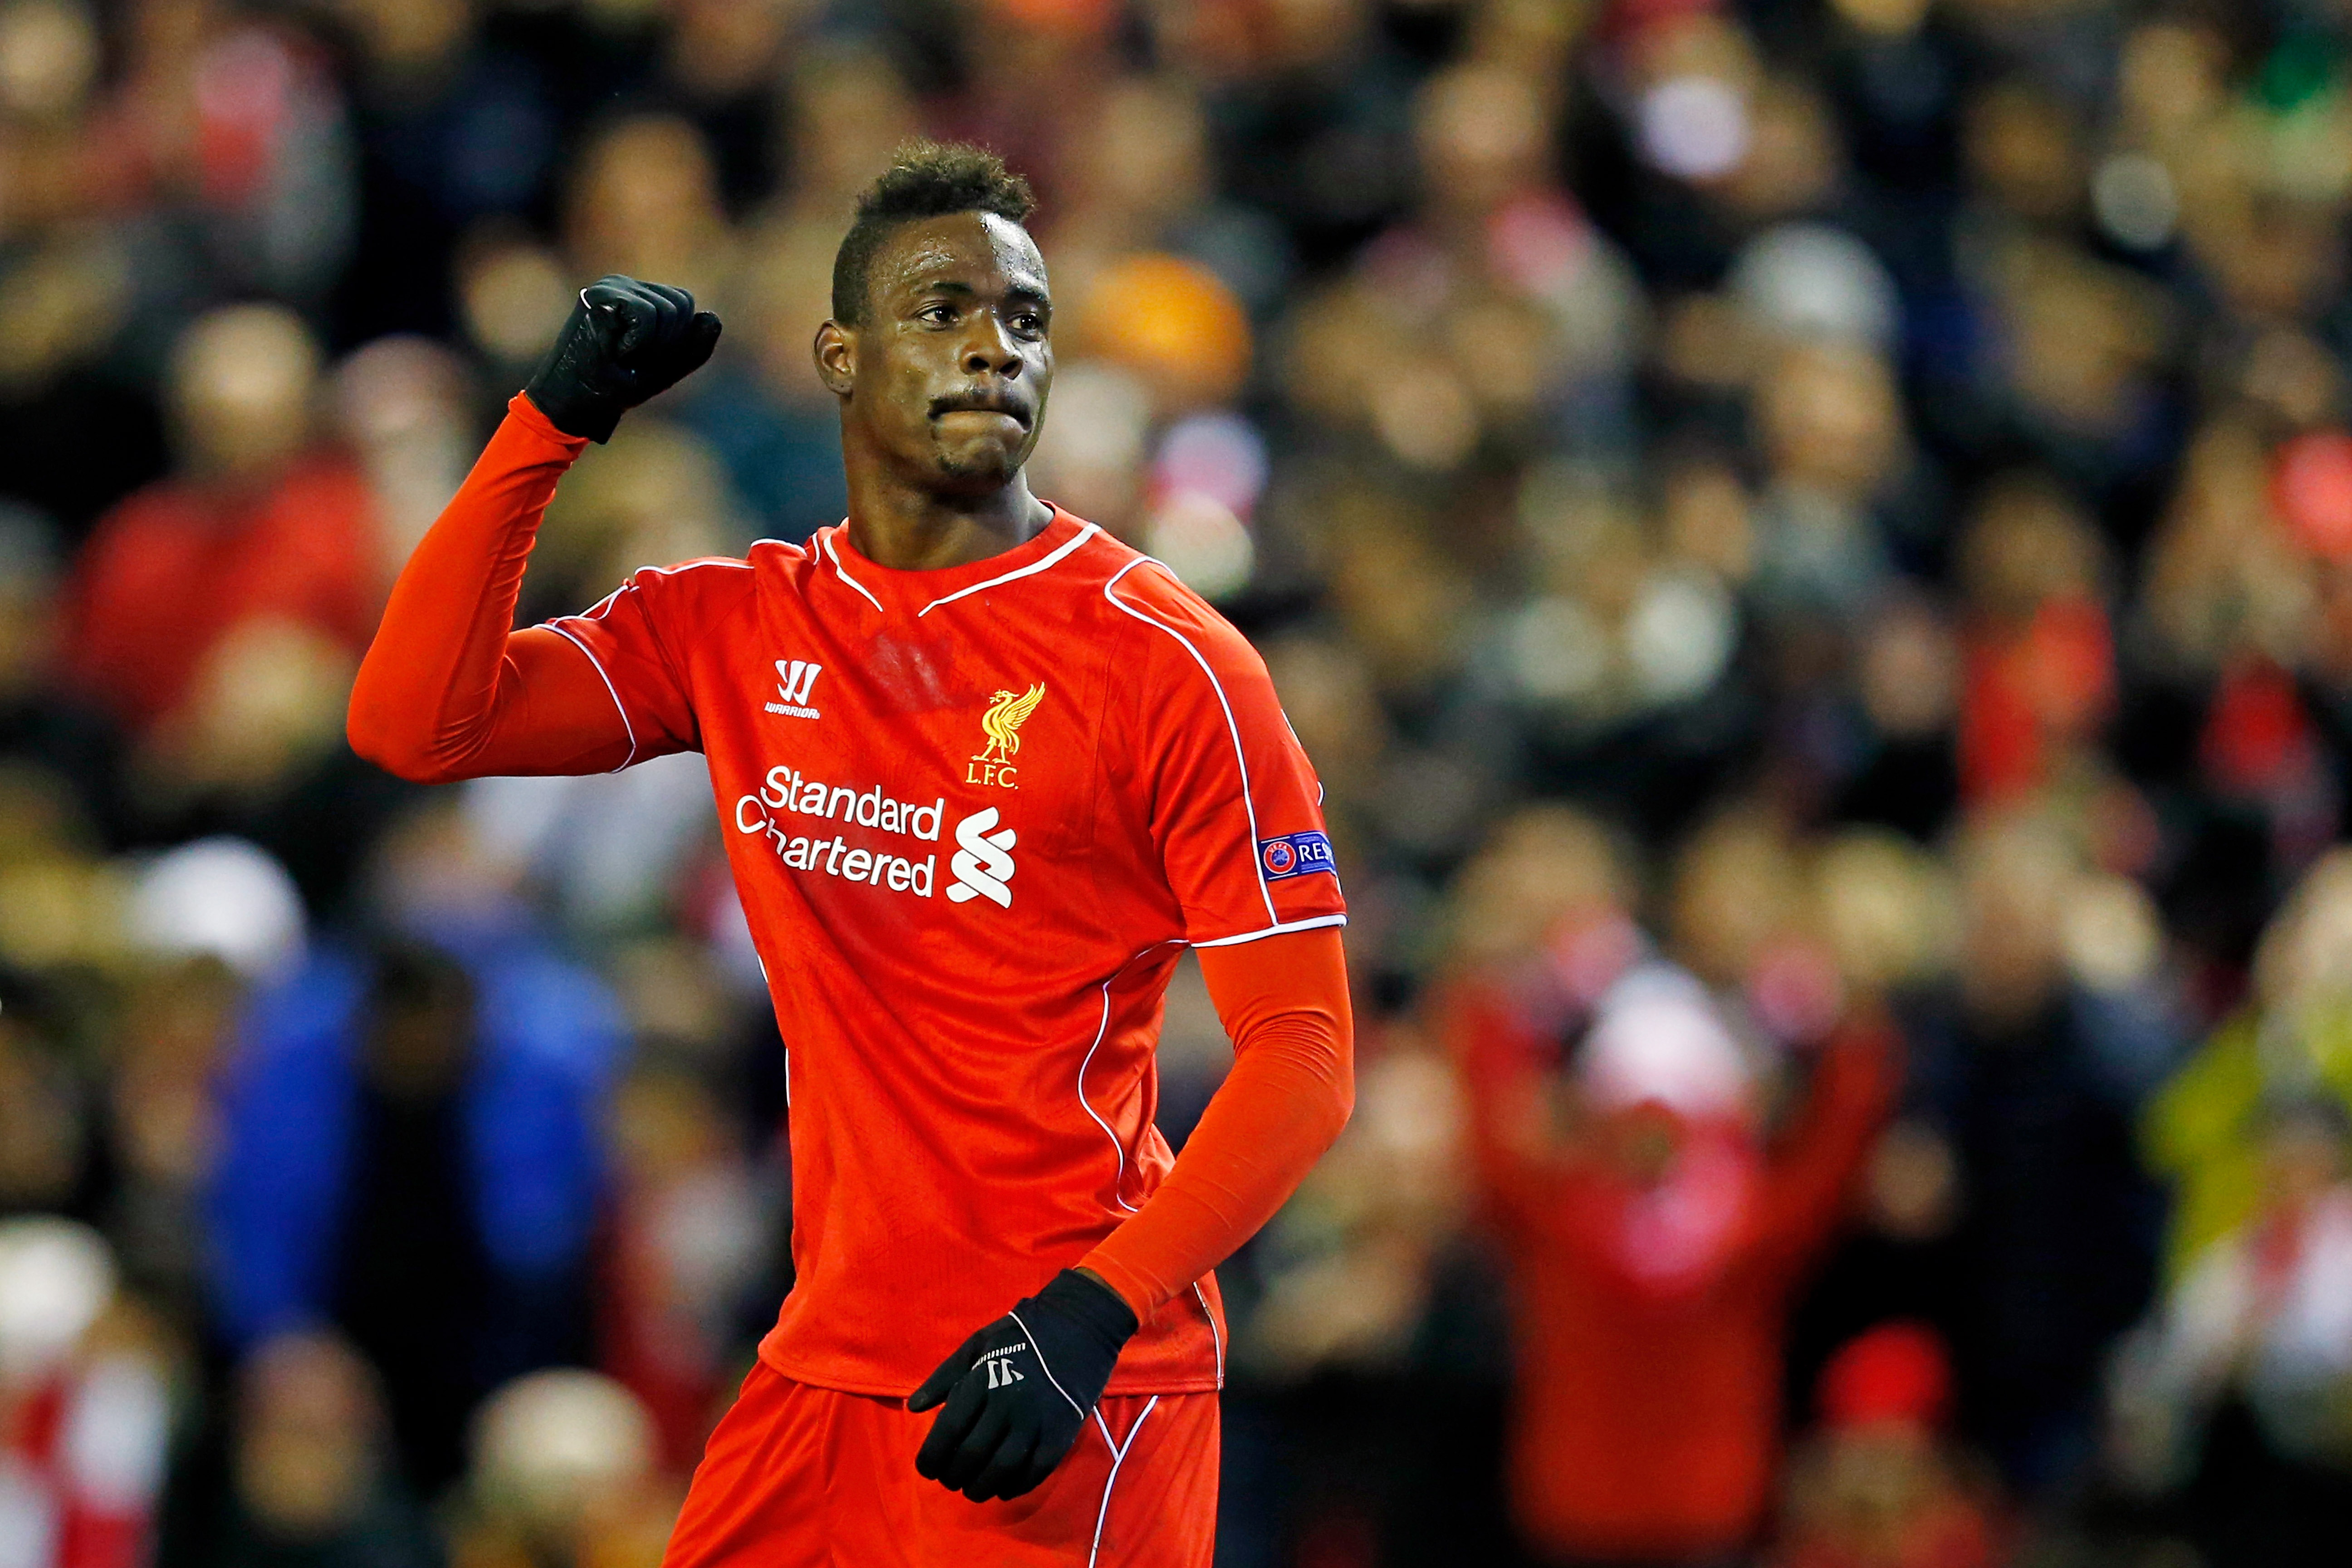 Mario Balotelli : Joining Liverpool was the worst decision of my life